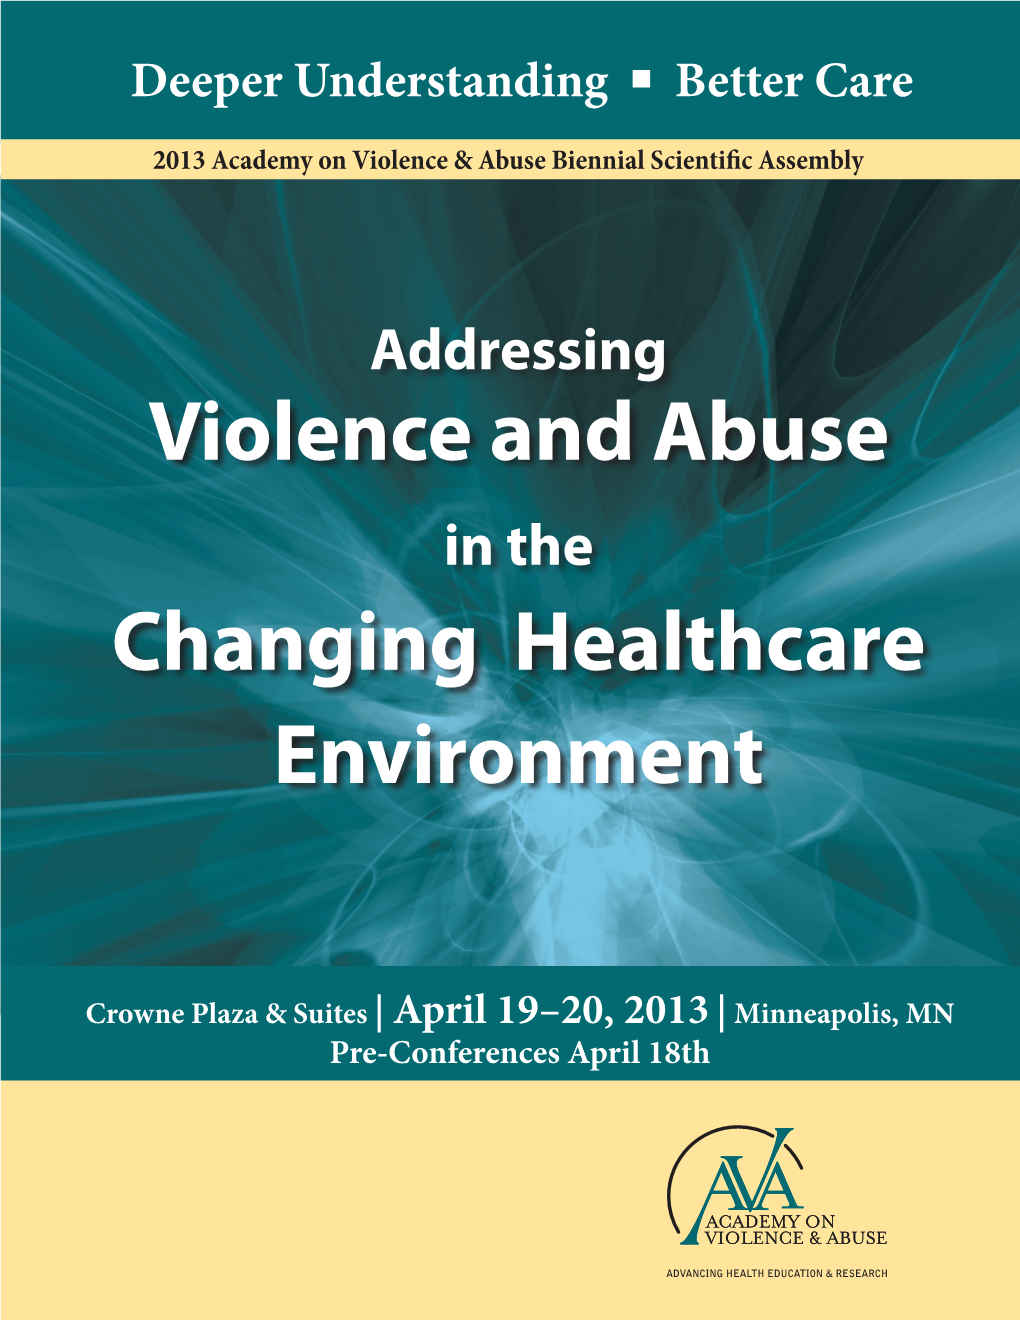 Violence and Abuse Changing Healthcare Environment